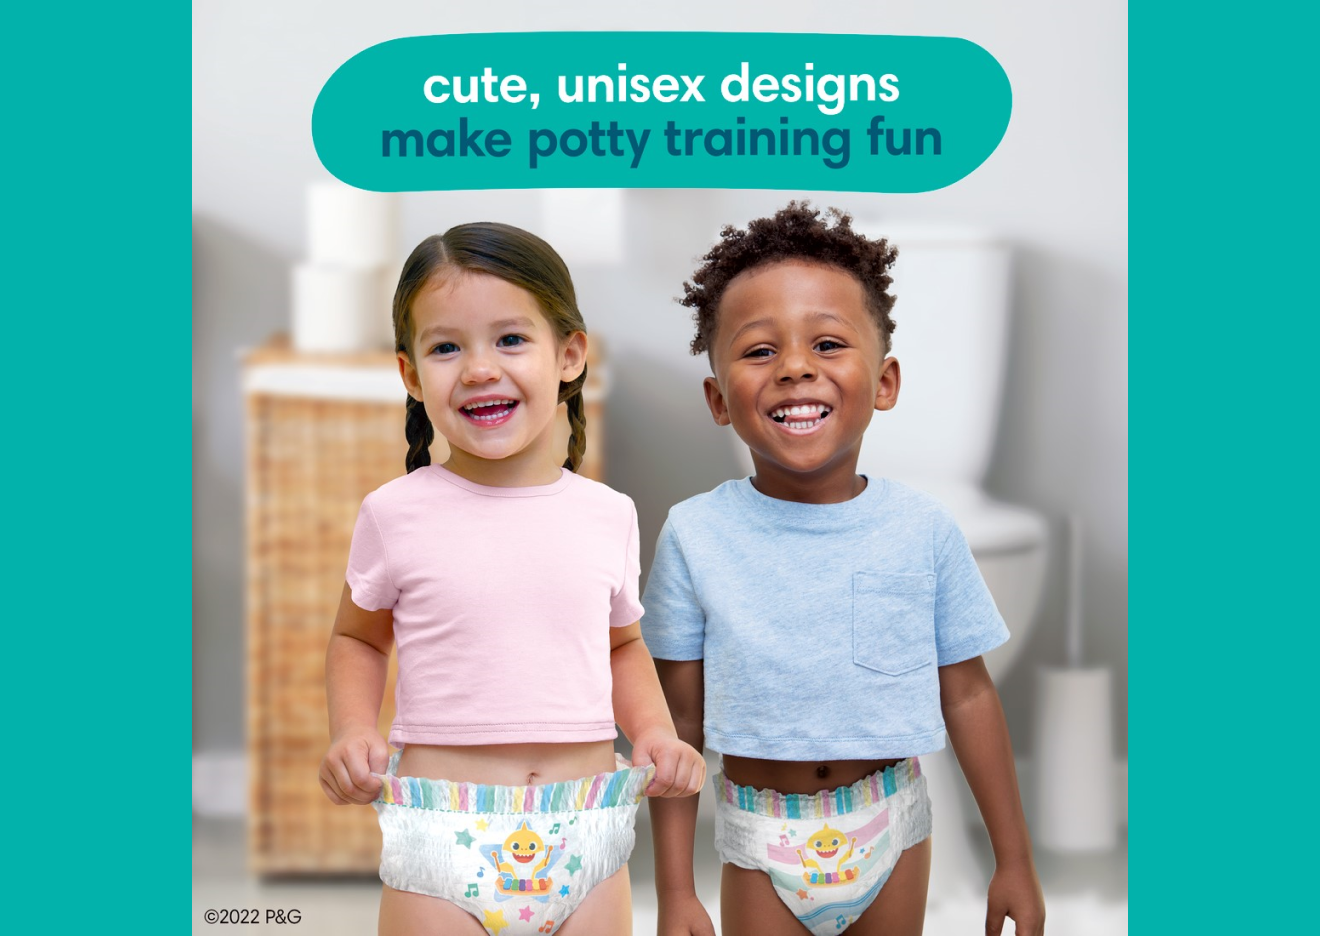 Image shows that Pampers Pure training pant are available in cute, unisex designs to make potty training fun